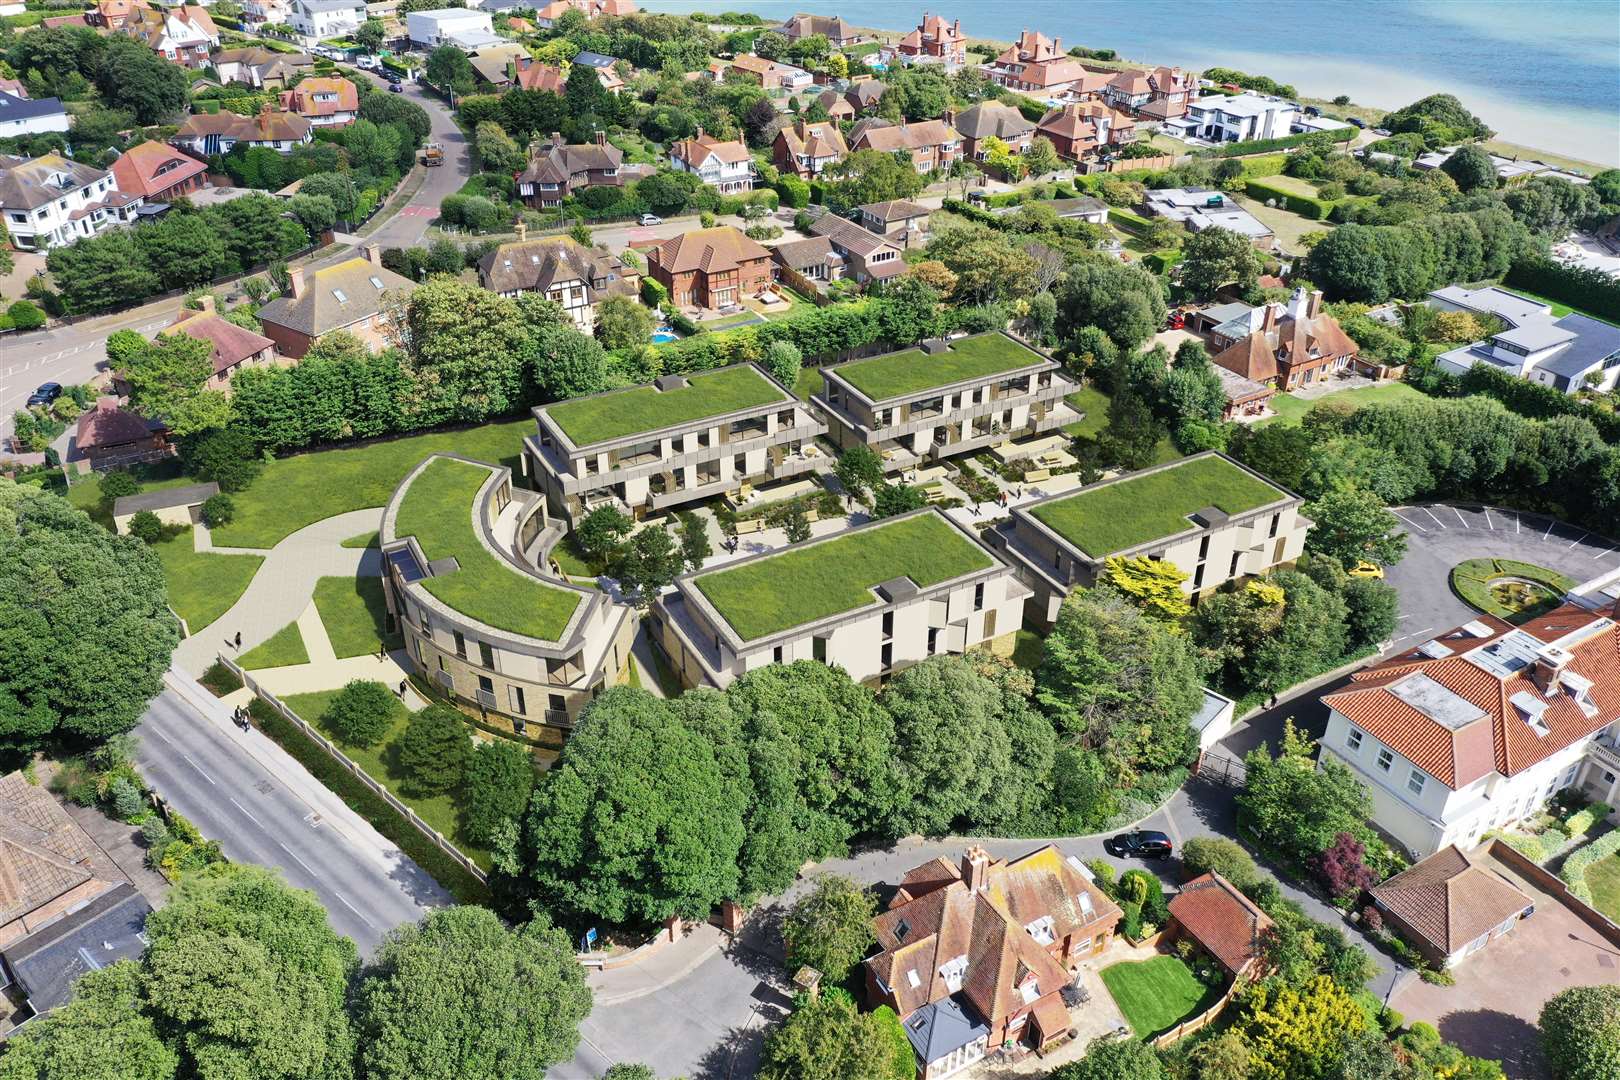 The development would include five buildings on the clifftop plot. Picture: Sunningdale/Hume